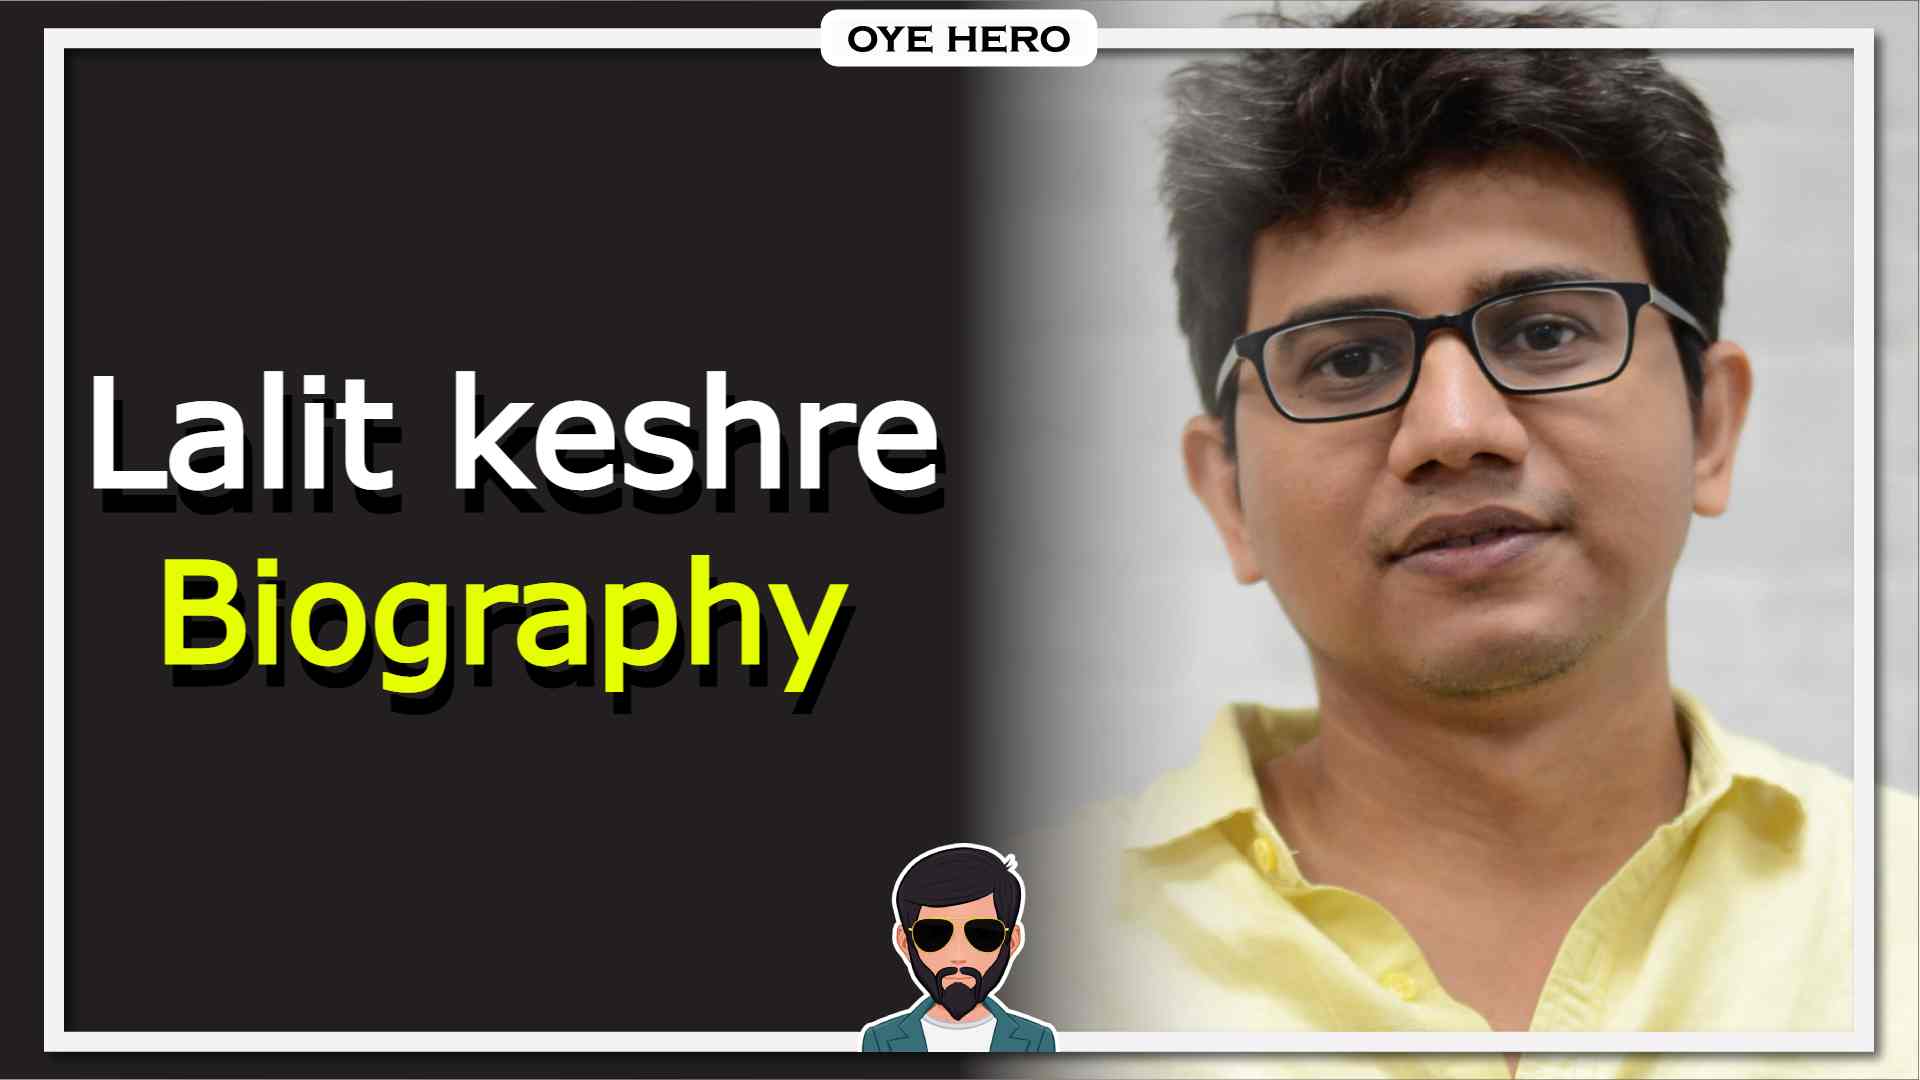 You are currently viewing Lalit keshre Biography & Wikipedia (Groww Co-Founder & CEO) !!